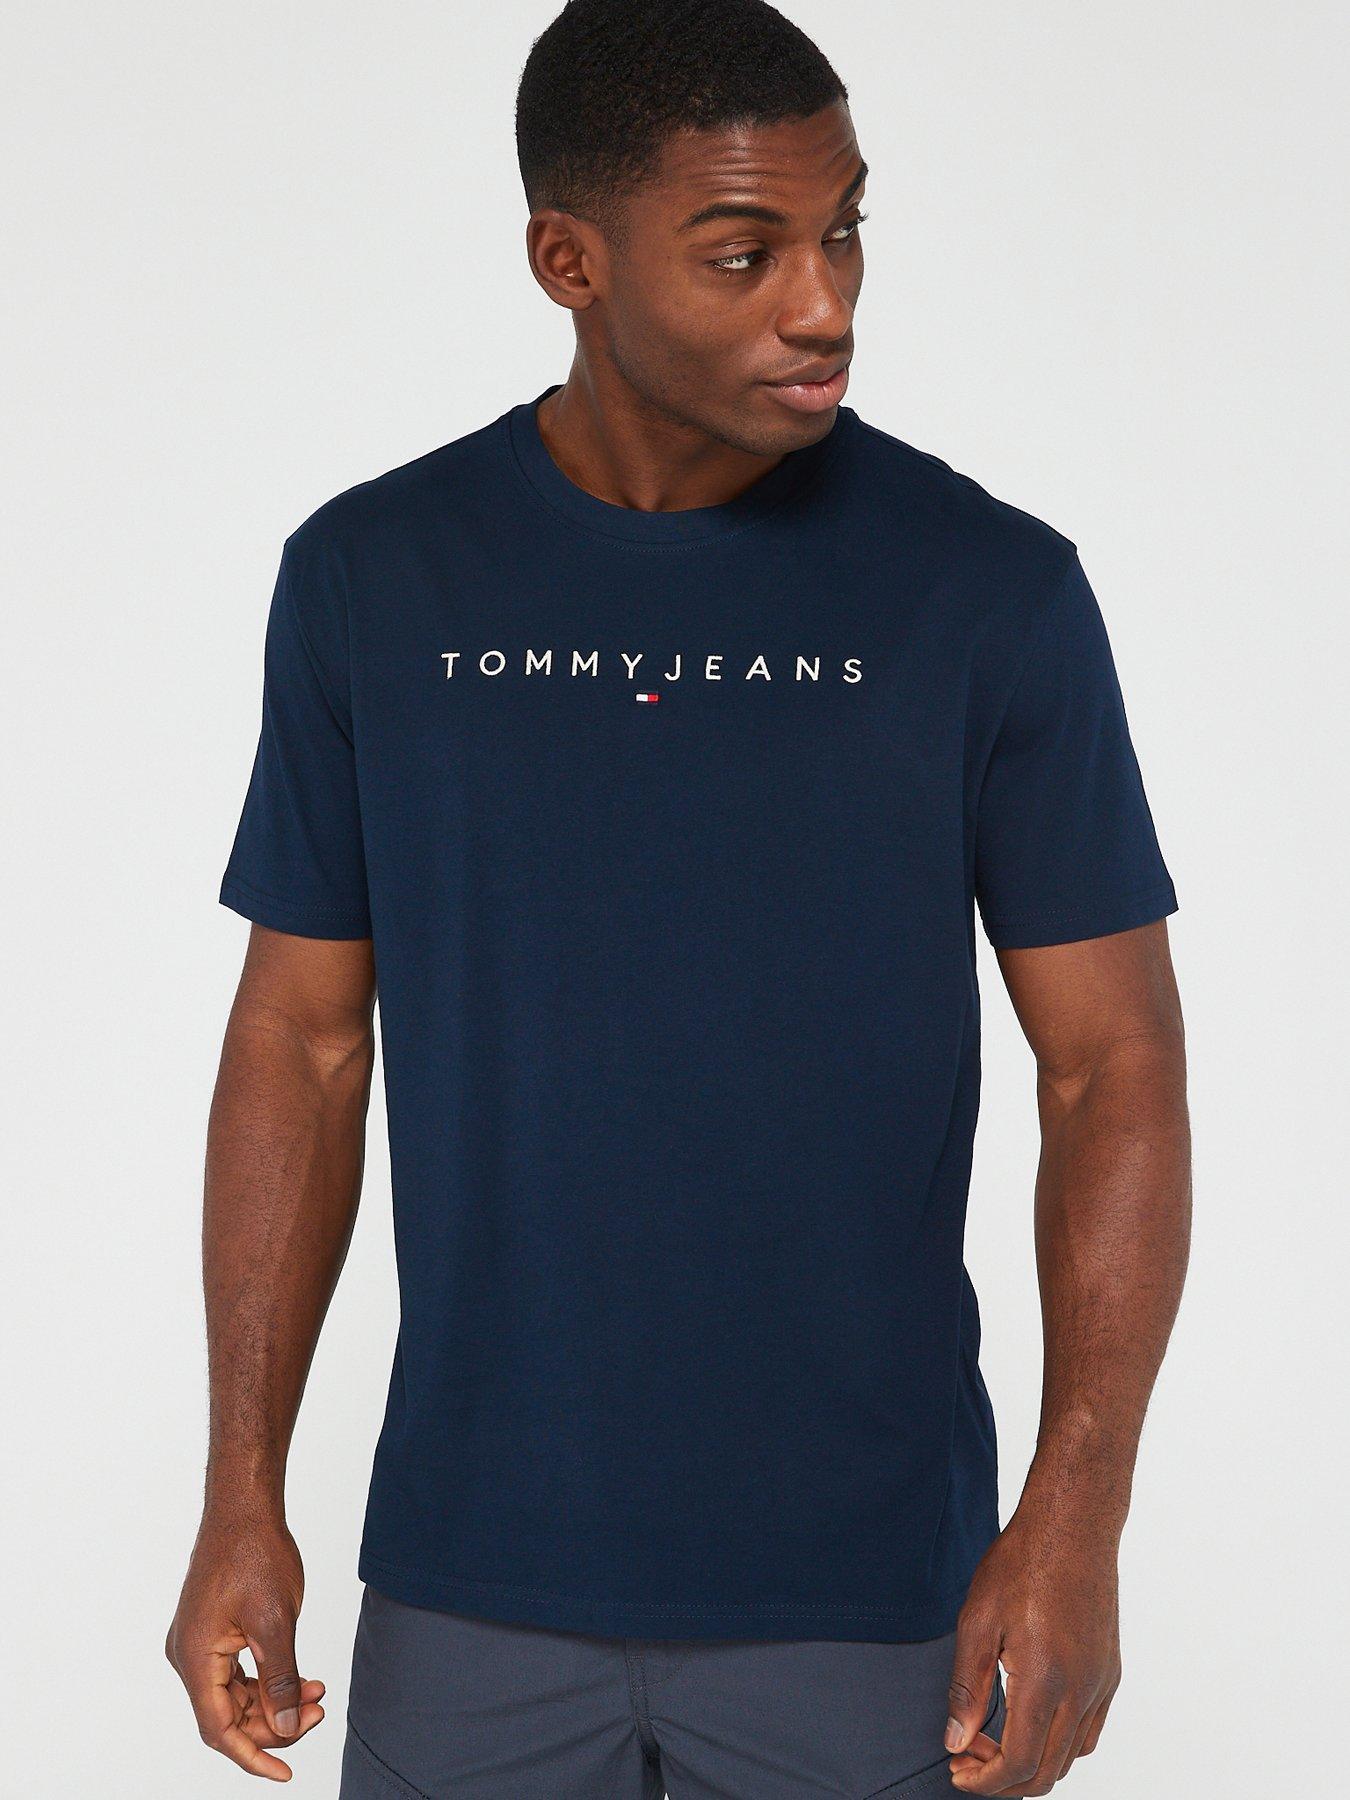 Tommy T-shirts | polos & Very Ireland | Men | jeans